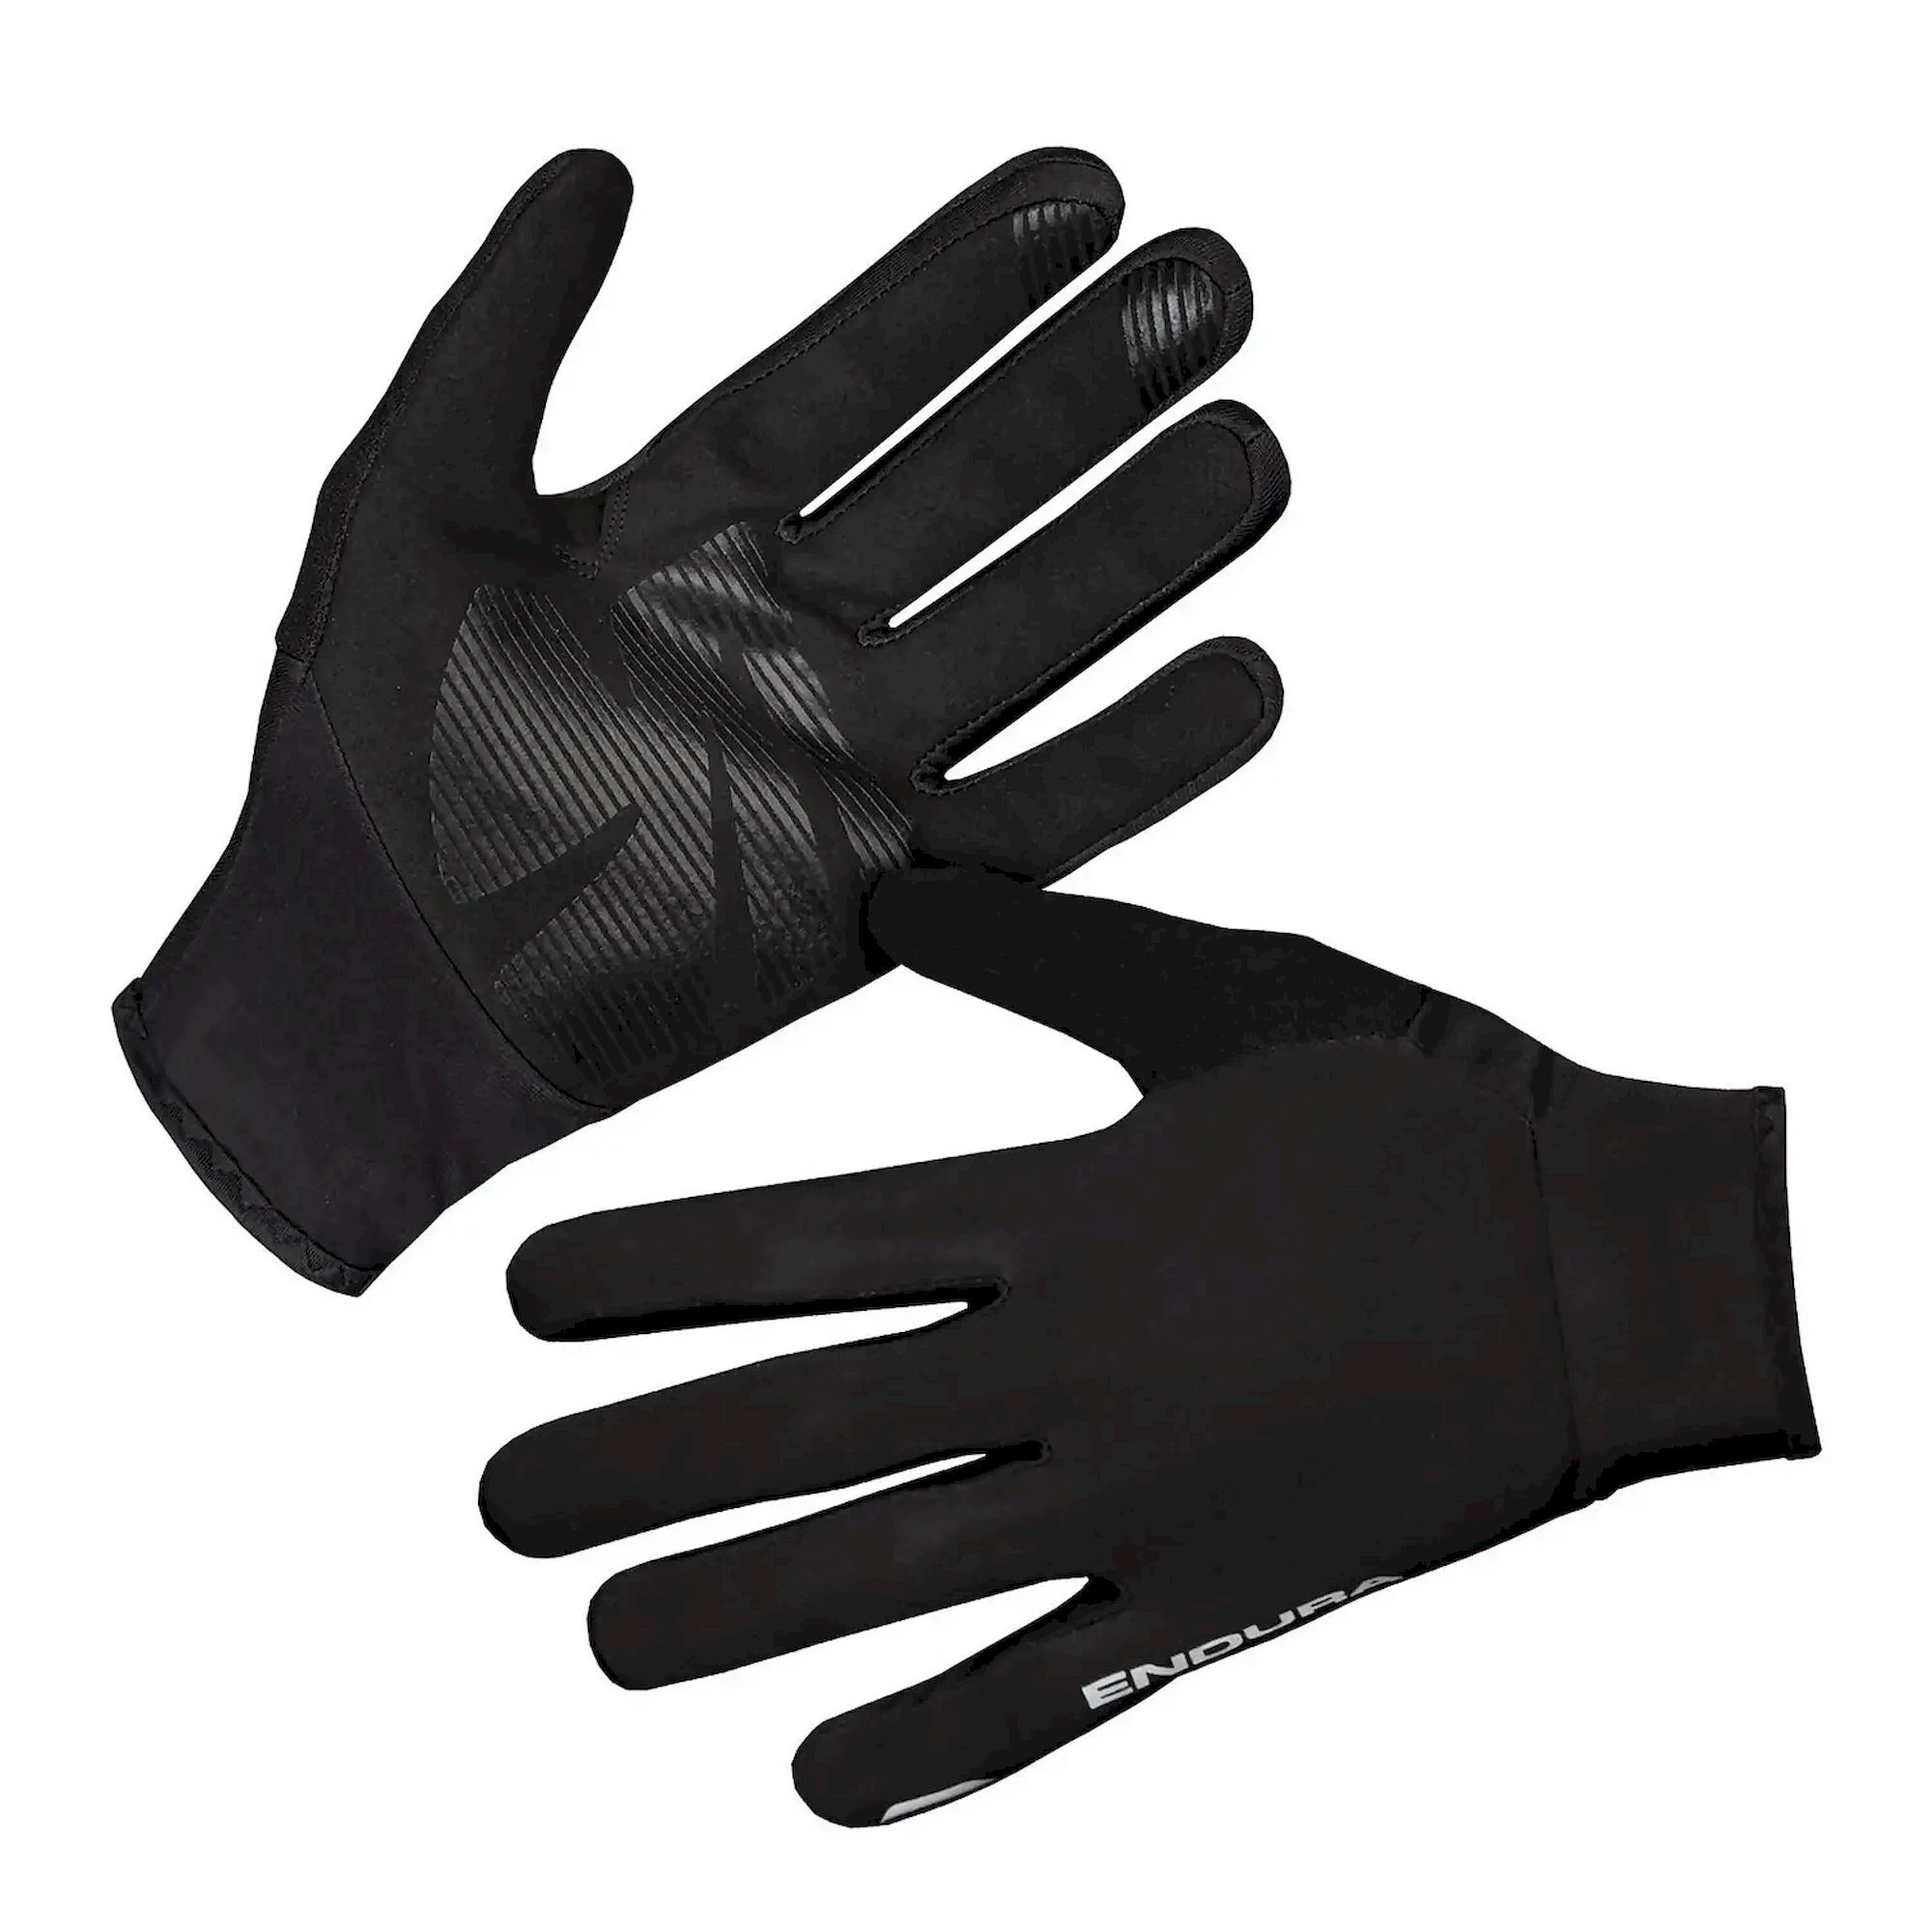 Endura FS260-Pro Thermo Glove - Cycling gloves - Men's | Hardloop